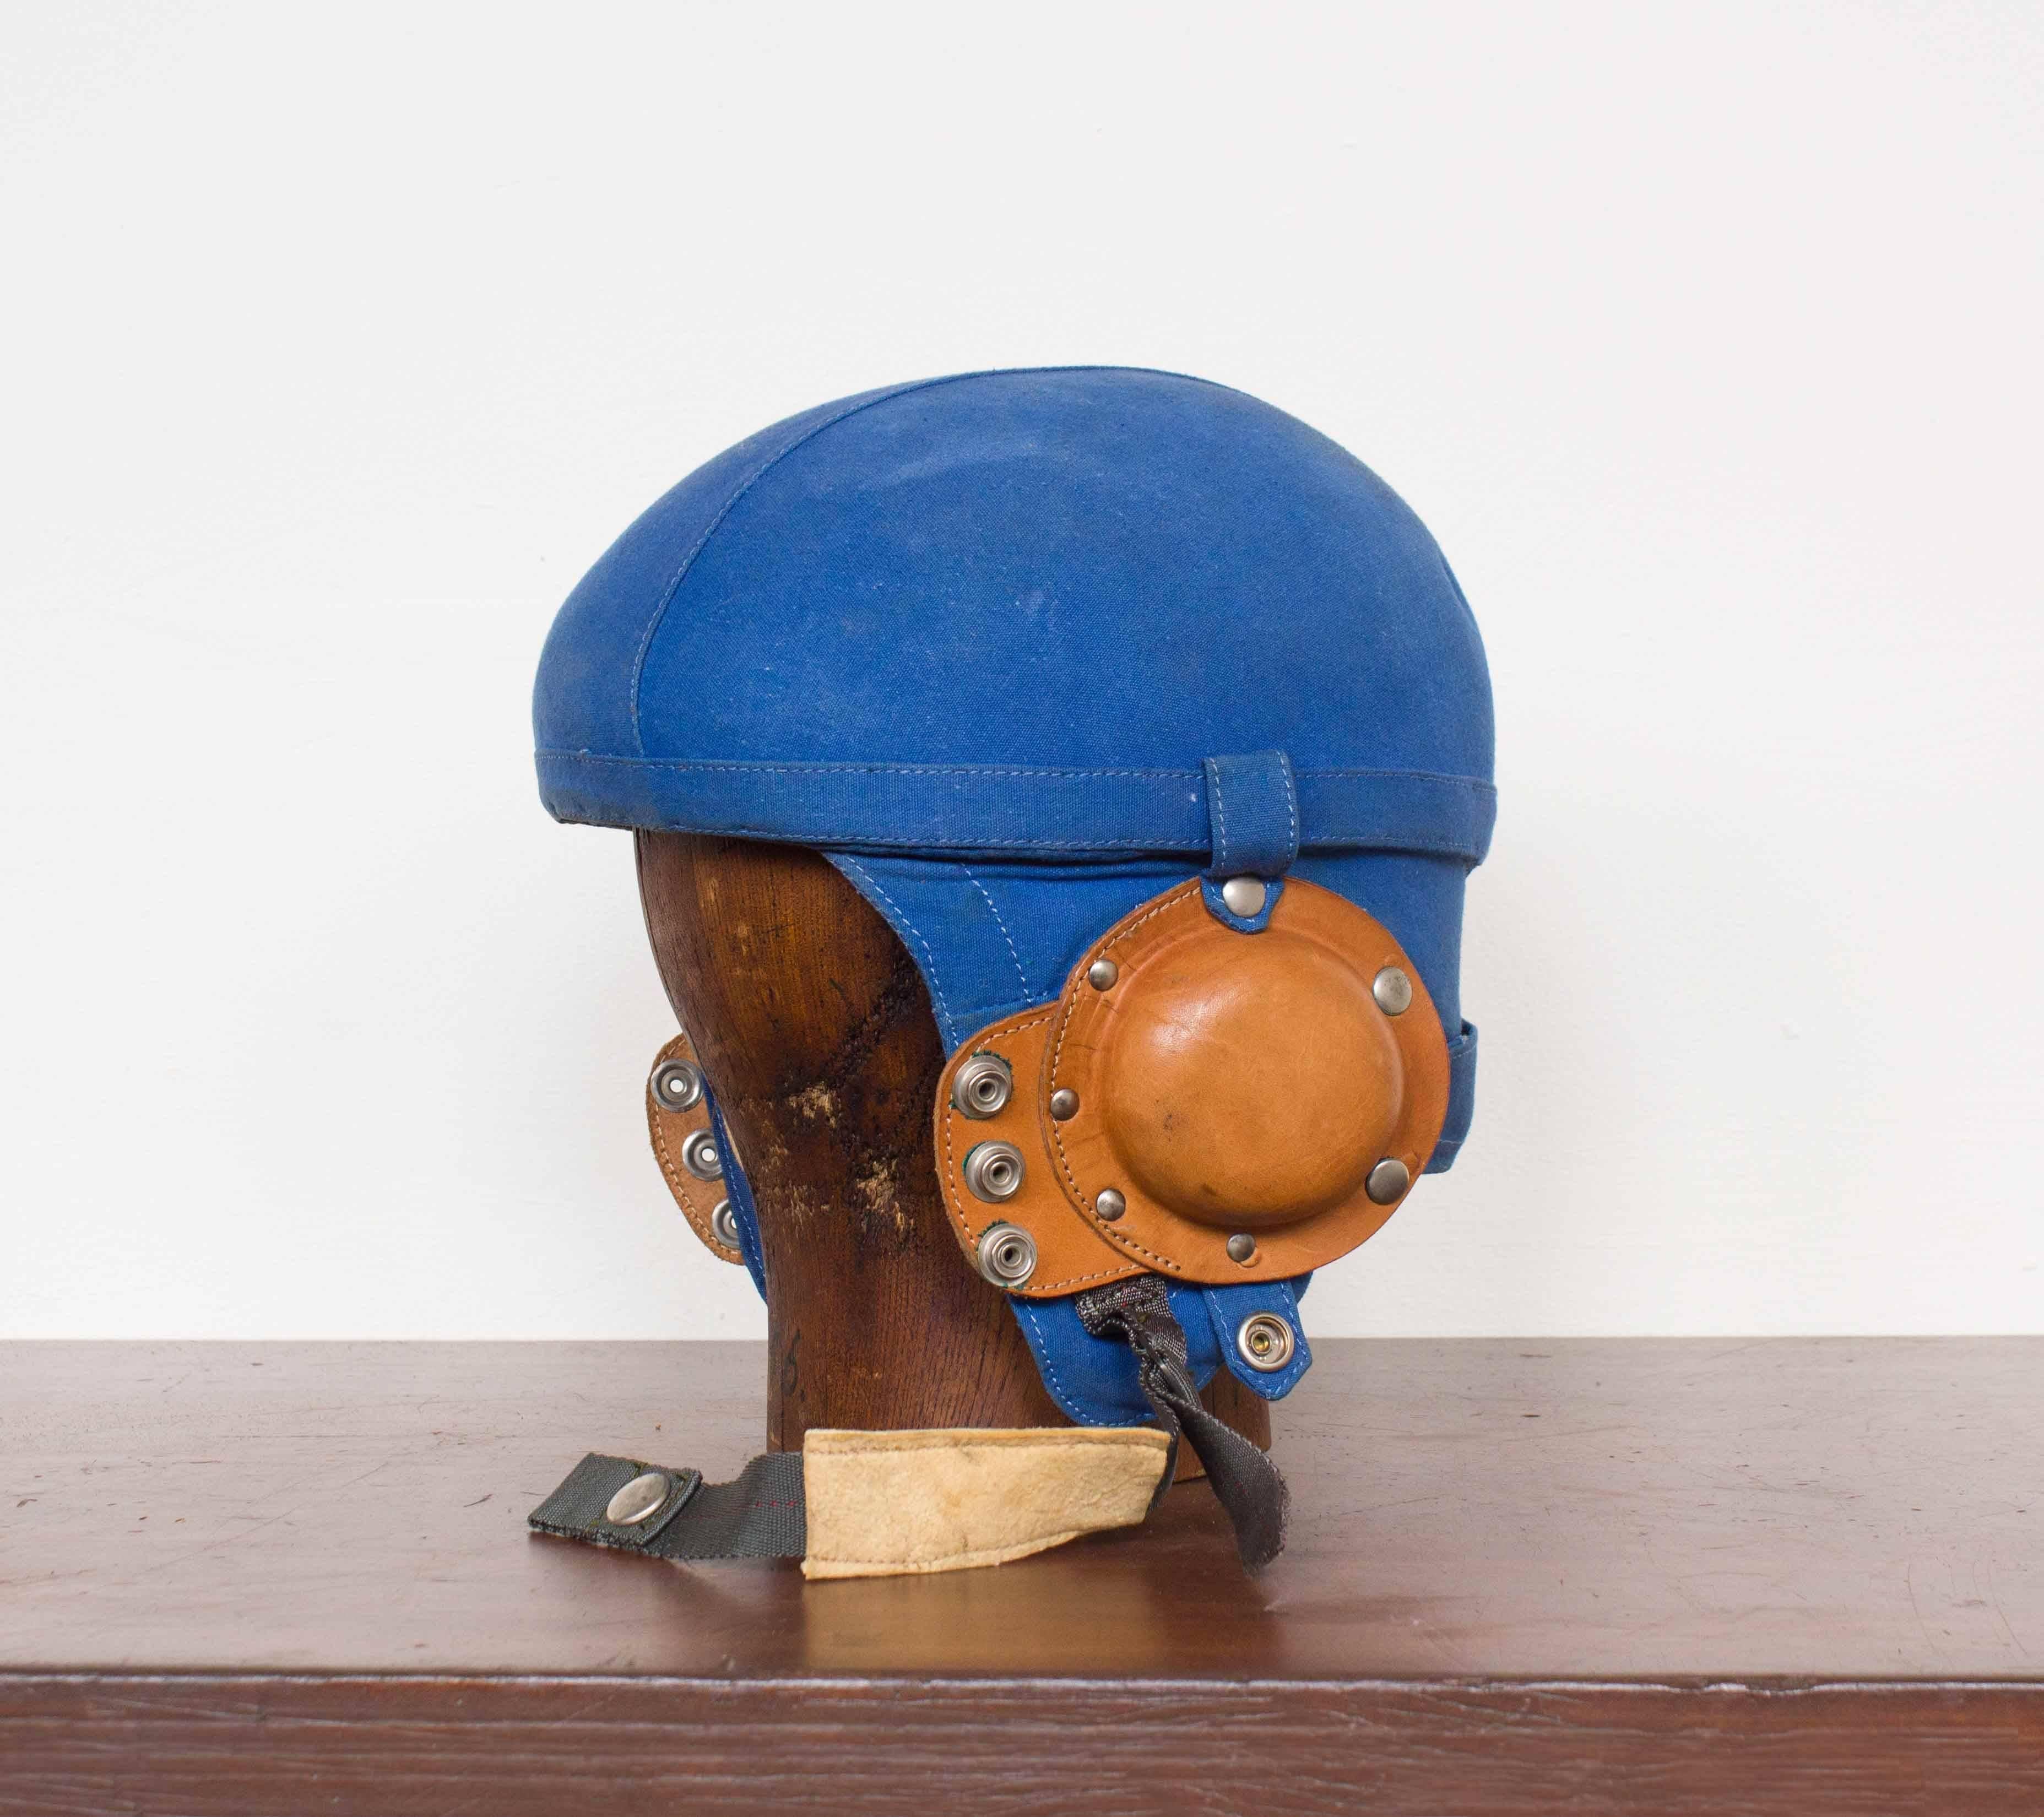 Pilot helmet of the Belgian Air Force from 1940-1950. This type of helmet was used on flights with the SV.4 aircraft. Later, this type of helmet was also used on the Hawker Hurricane aircraft.

The helmet comes with the antique mannequin head made